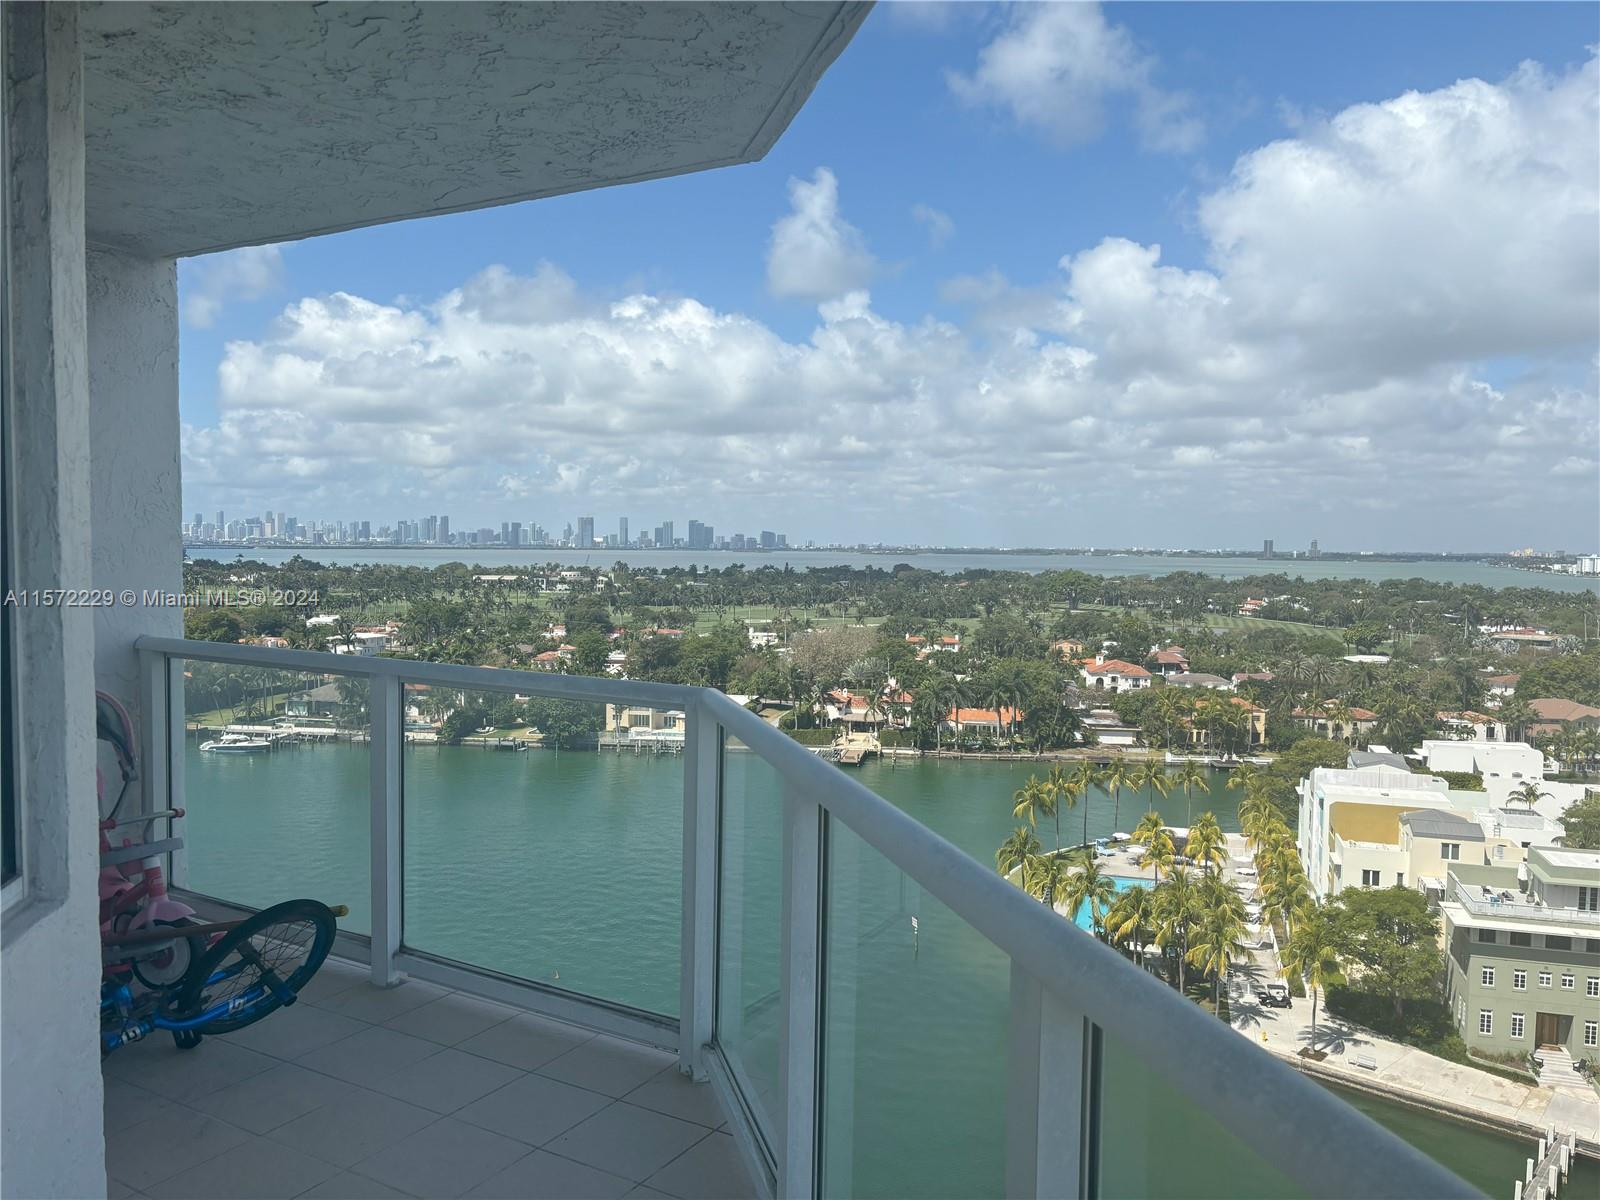 Unfurnished 3 bedroom, 2 bath Corner Unit at The Grandview with Panoramic Views of Miami Skyline, Biscayne Bay, Intracoastal, Miami Beach & Ocean. Newly renovated kitchen. All common areas recently updated including an new community room and other lounge areas on the lobby and roof level. Other amenities include pool, gym, sauna, jacuzzi/hot tub. 2 car tandem parking. Ideal location with each access to South Beach, North Beach/Surfside and I-195/Miami. 40 ft dock available for rent separately.